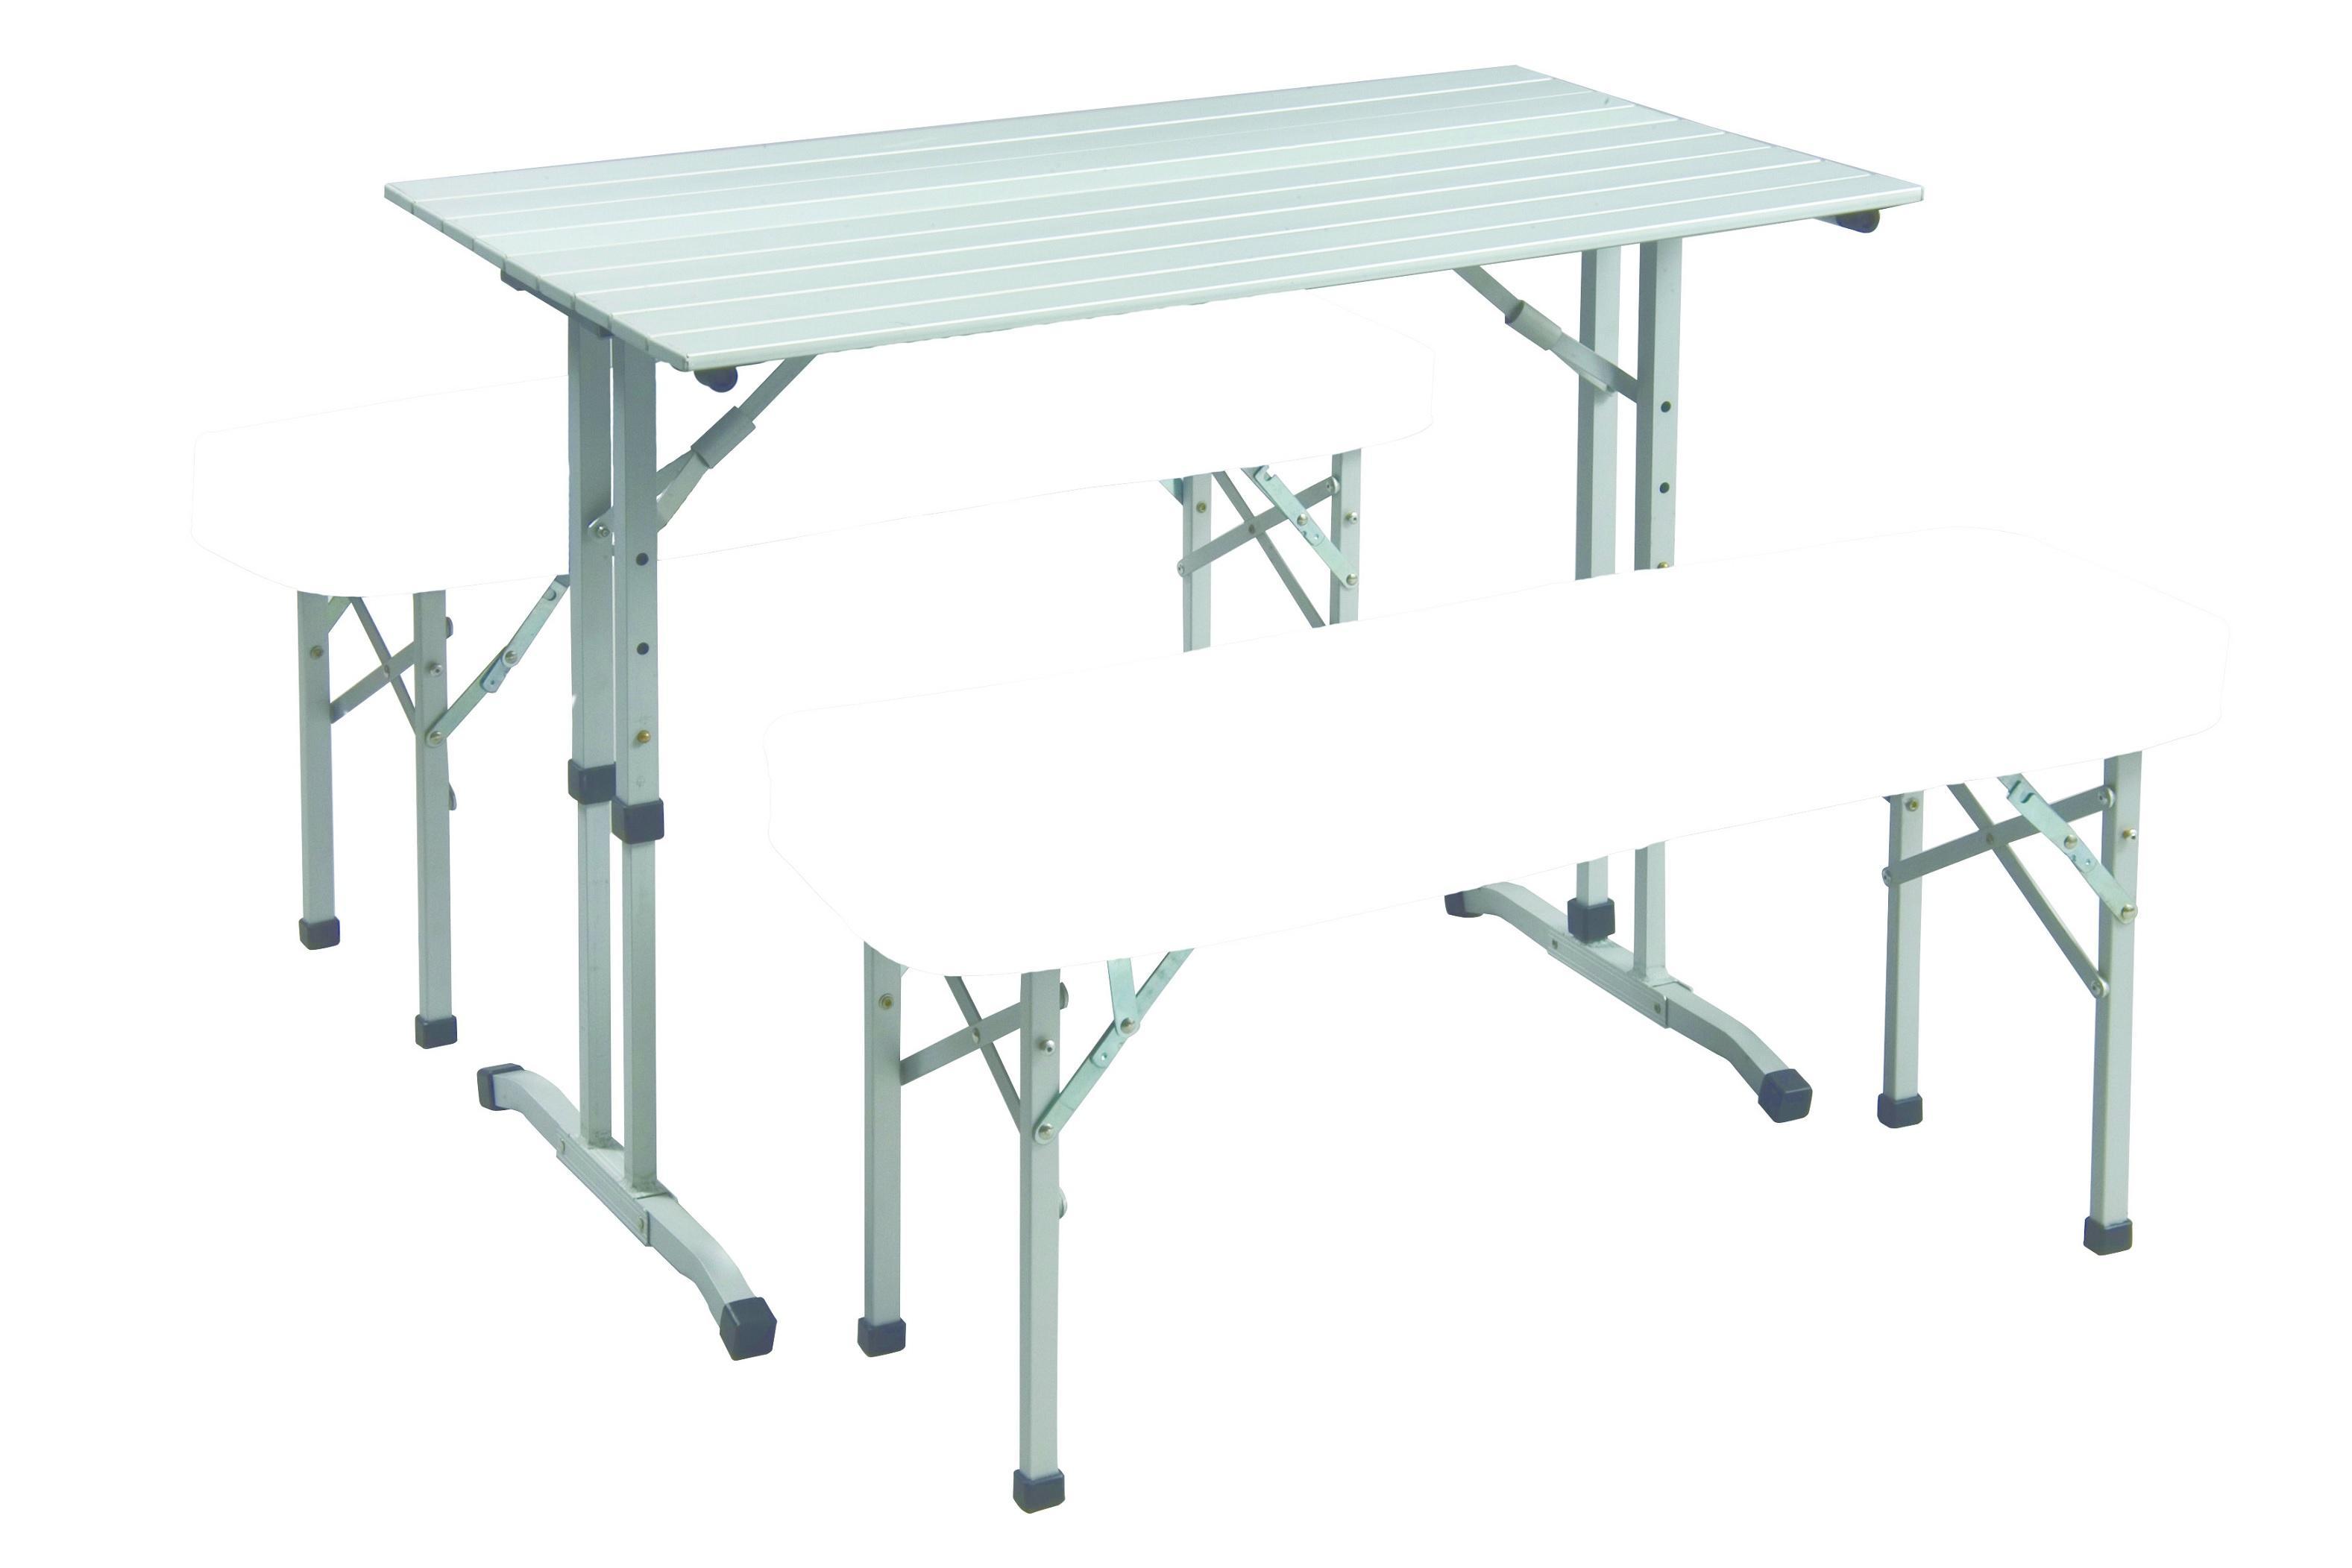 Foto Sunncamp Table & Bench Set with Cushions